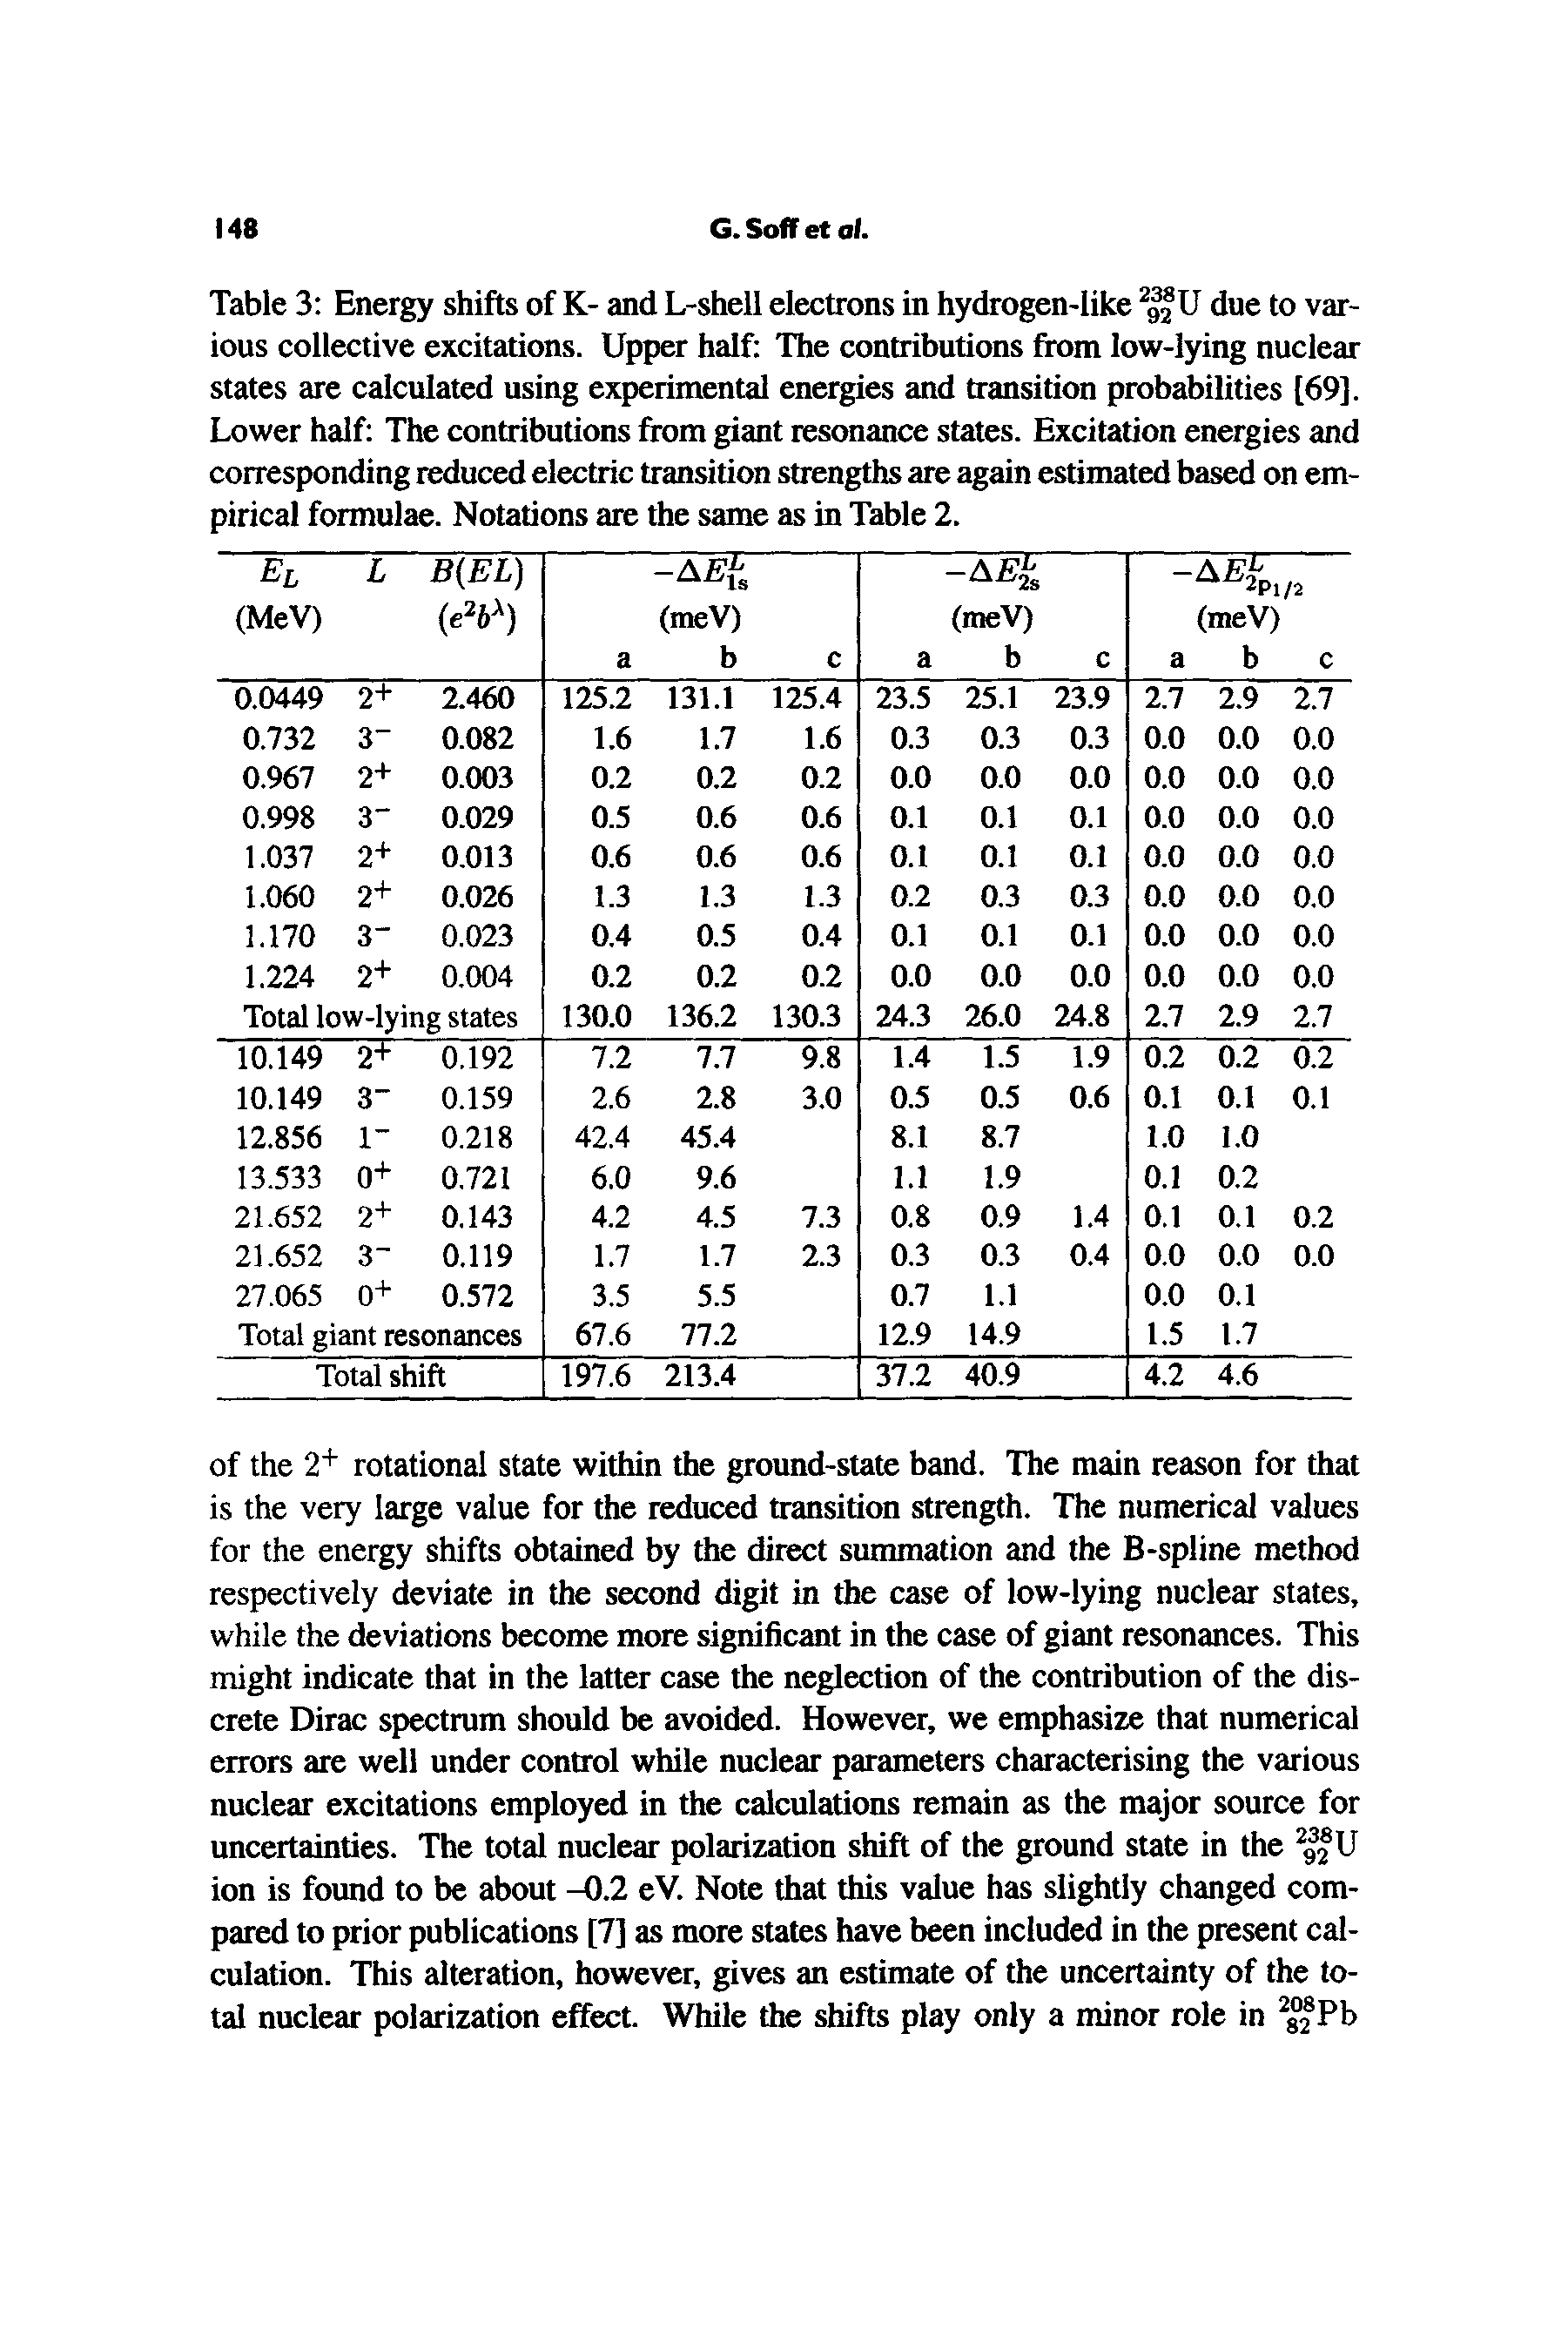 Table 3 Energy shifts of K- and L-shell electrons in hydrogen-like due to various collective excitations. Upper half The contributions fixim low-lying nuclear states are calculated using experimental energies and transition probabilities [69]. Lower half The contributions from giant resonance states. Excitation energies and corresponding reduced electric transition strengths are again estimated based on empirical formulae. Notations are the same as in Table 2.